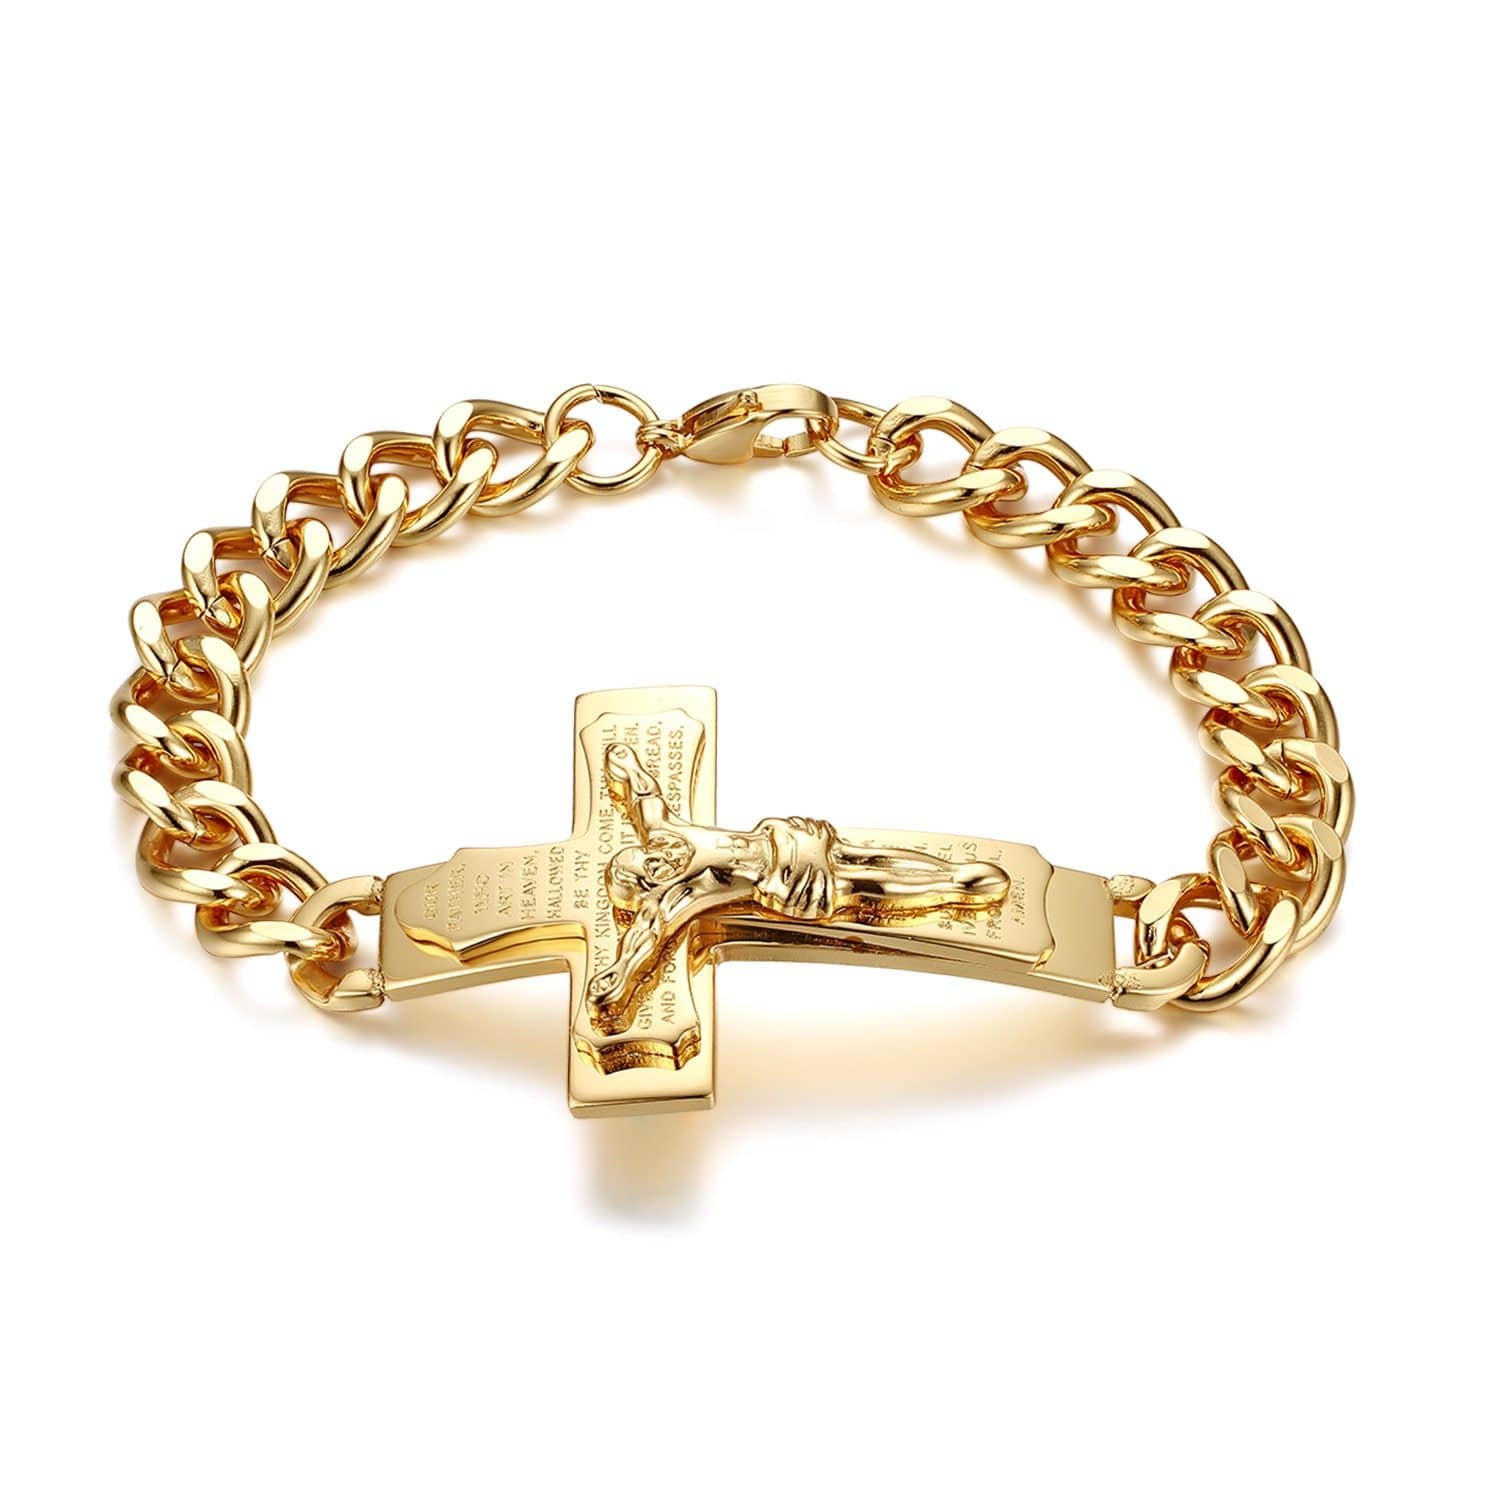 Cross Charm Gold Cuff Bracelet, Used By God, Used By God Clothing, Christian Apparel, Christian Bracelets, Christian Necklace, Christian Jewelry, Christian Gift, Wood Bracelet, Cross Bracelet, Christian Prayer Beads, Religious Gift, Prayer Bracelet, Prayer Beds, Cross Necklace, Cros Crucifix Necklace, Men's Bracelet, Women's Bracelet, Men's Necklace, Women's Necklace, Elevated Faith, String Bracelets, black cross